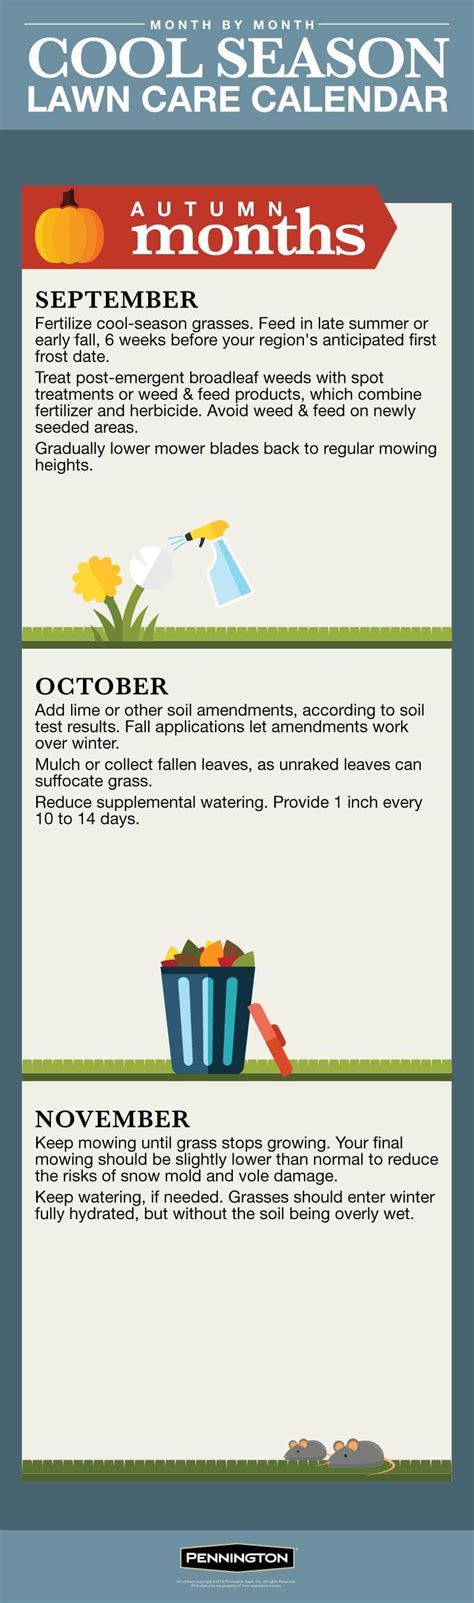 Lawn Care Calendar For Cool Season Lawns Infographic